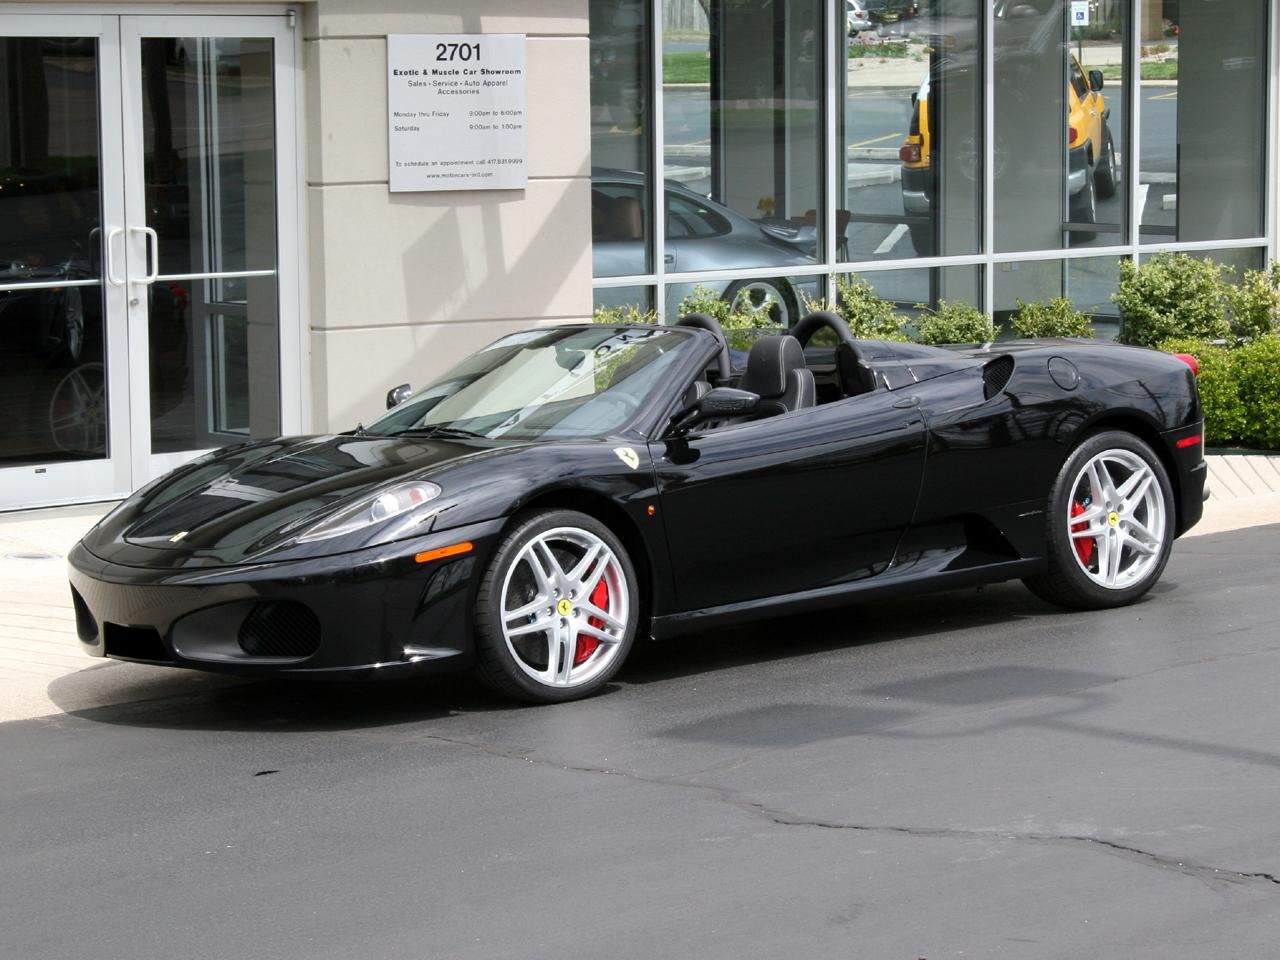 Simon Cowell's black Ferrari F430 Spider convertible parked next to a building